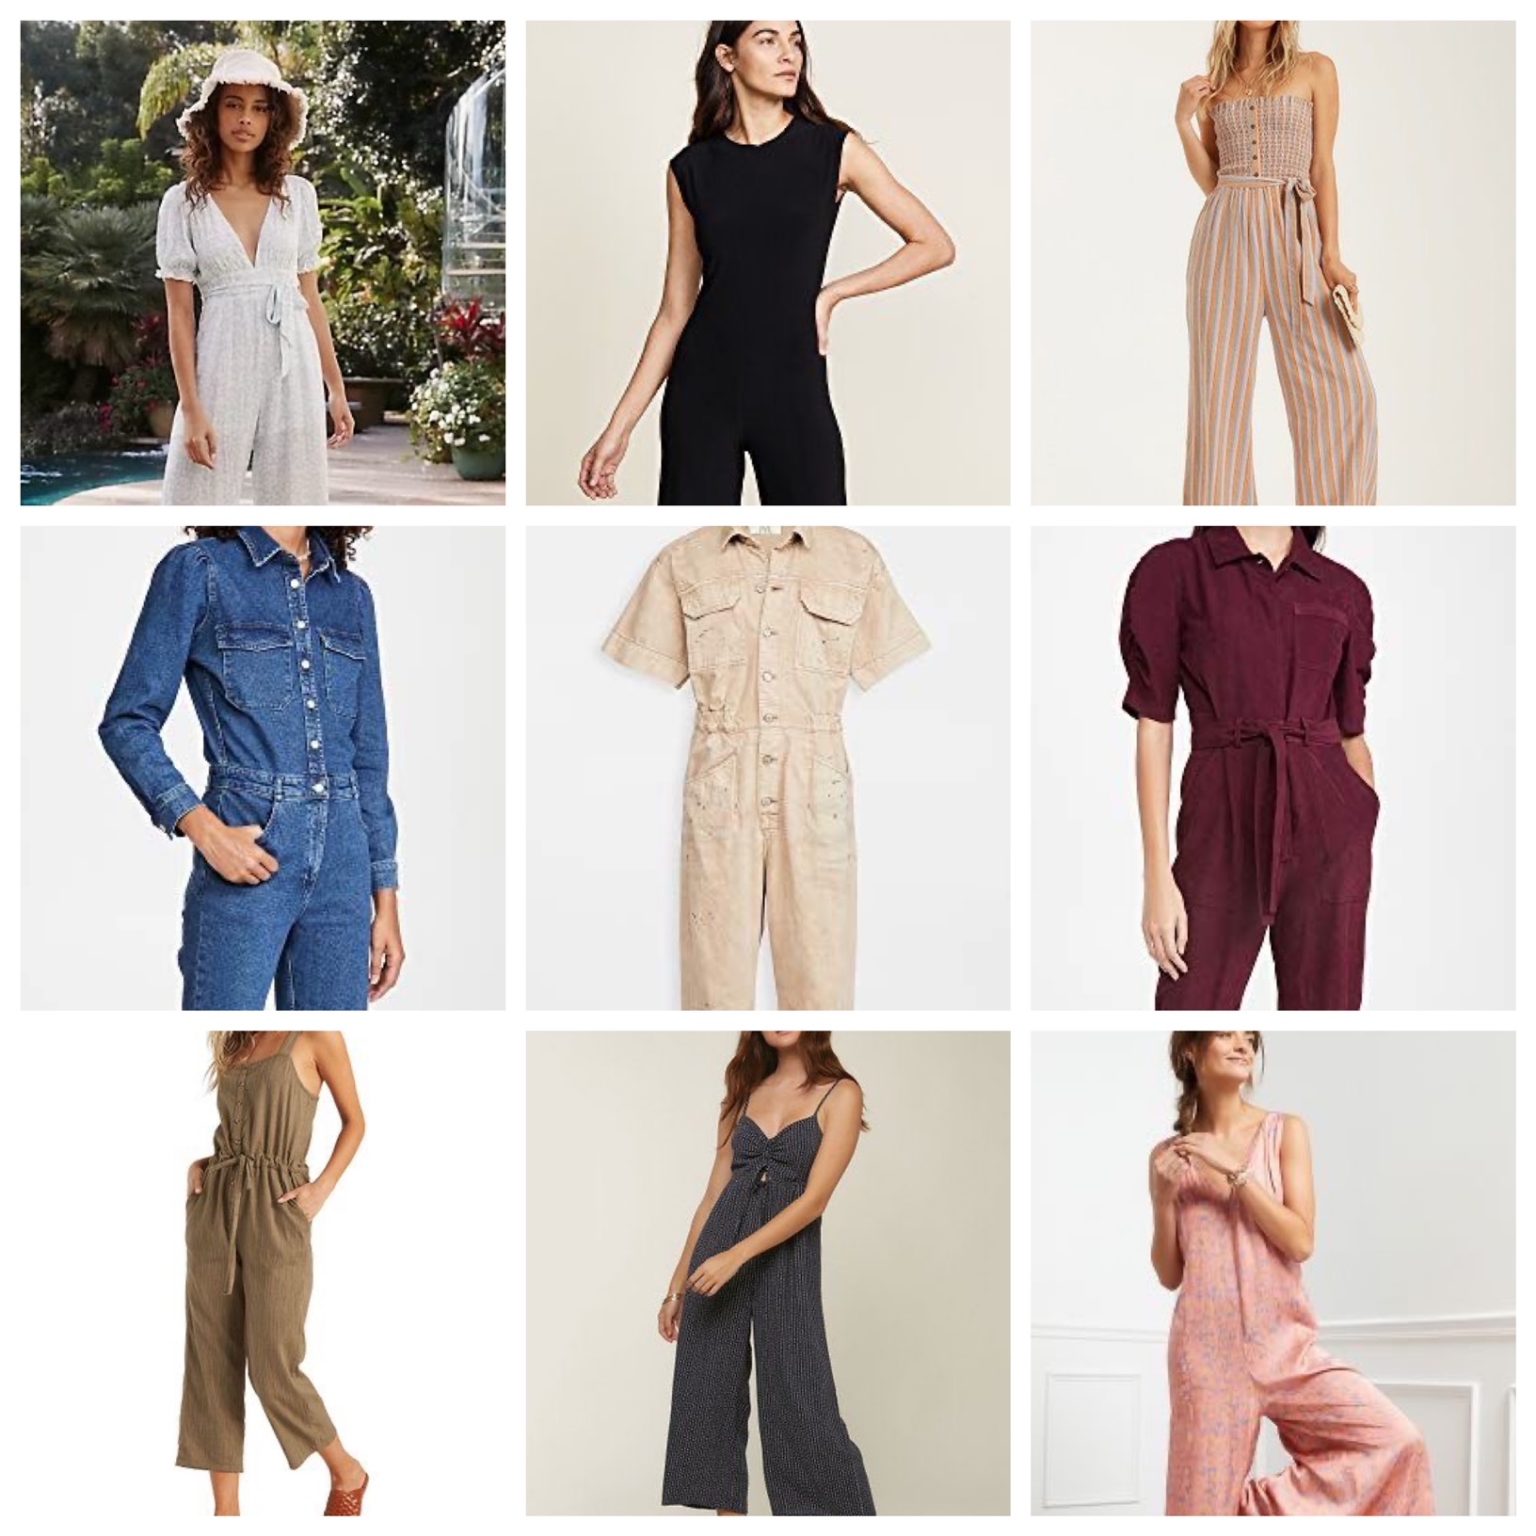 Friday Finds: Jumpsuits - Rage Against The Minivan